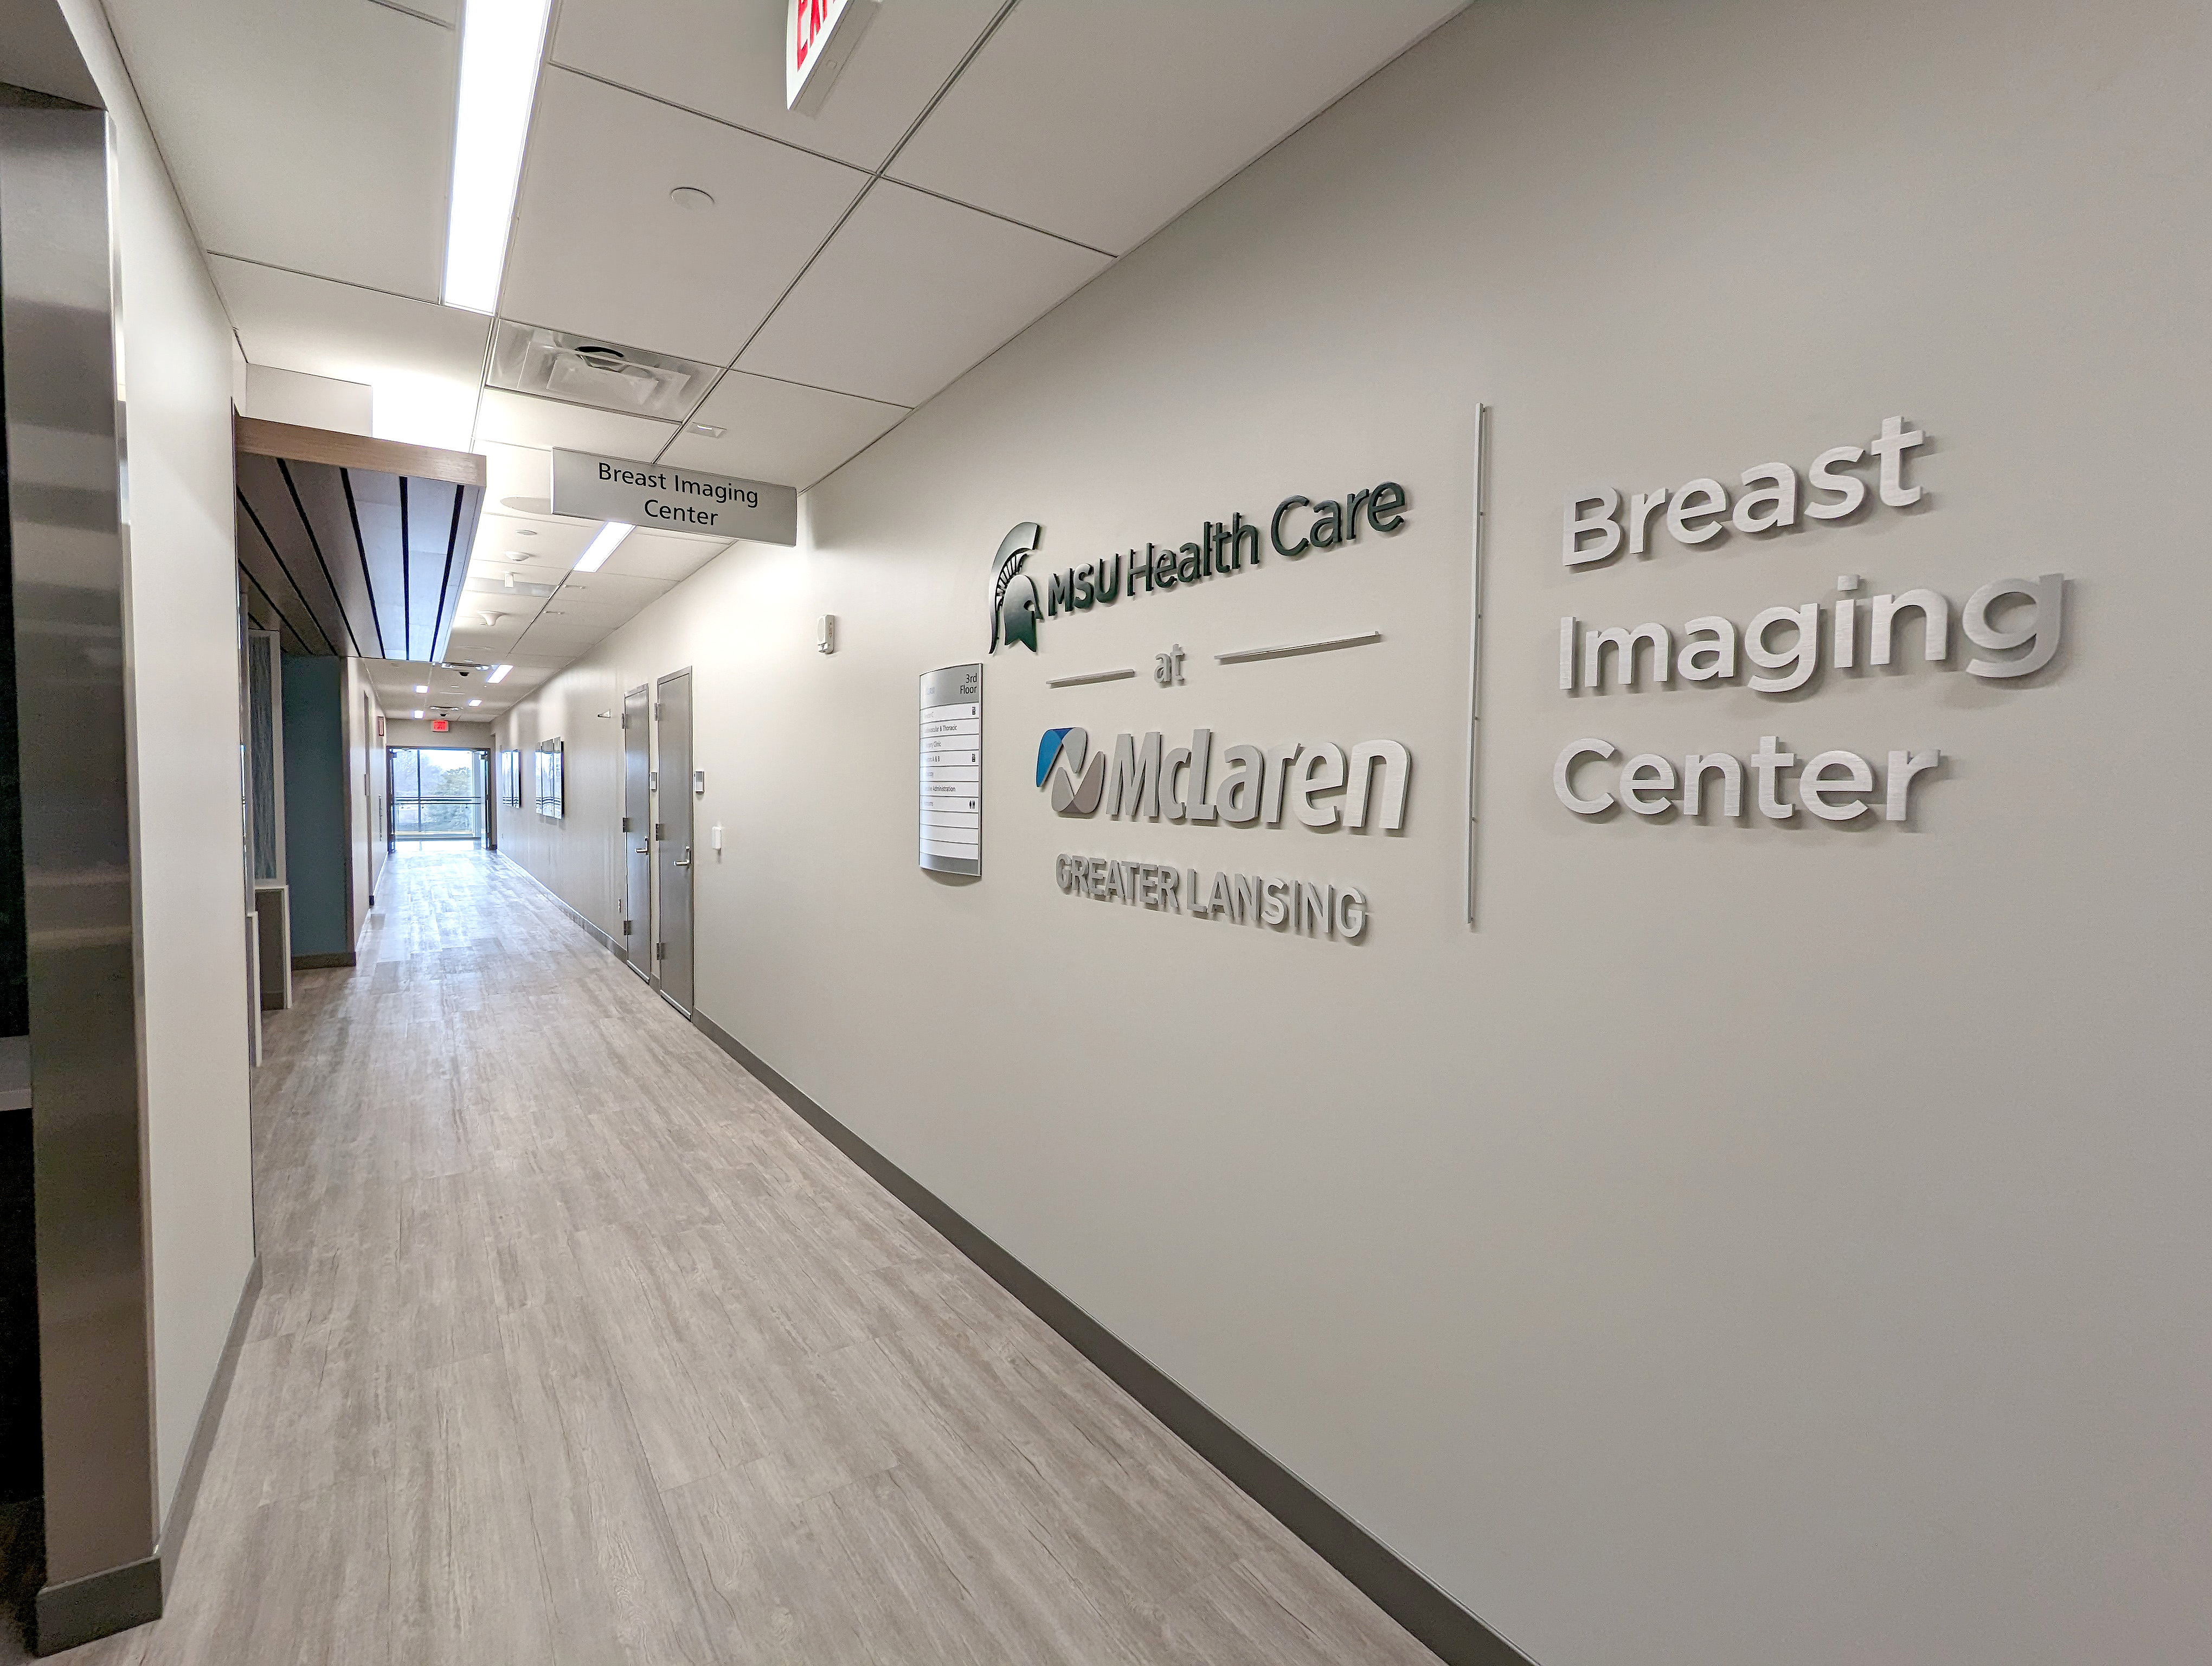 Image of the lobby and logo of the MSU Health Care at McLaren Greater Lansing Breast Imaging Center